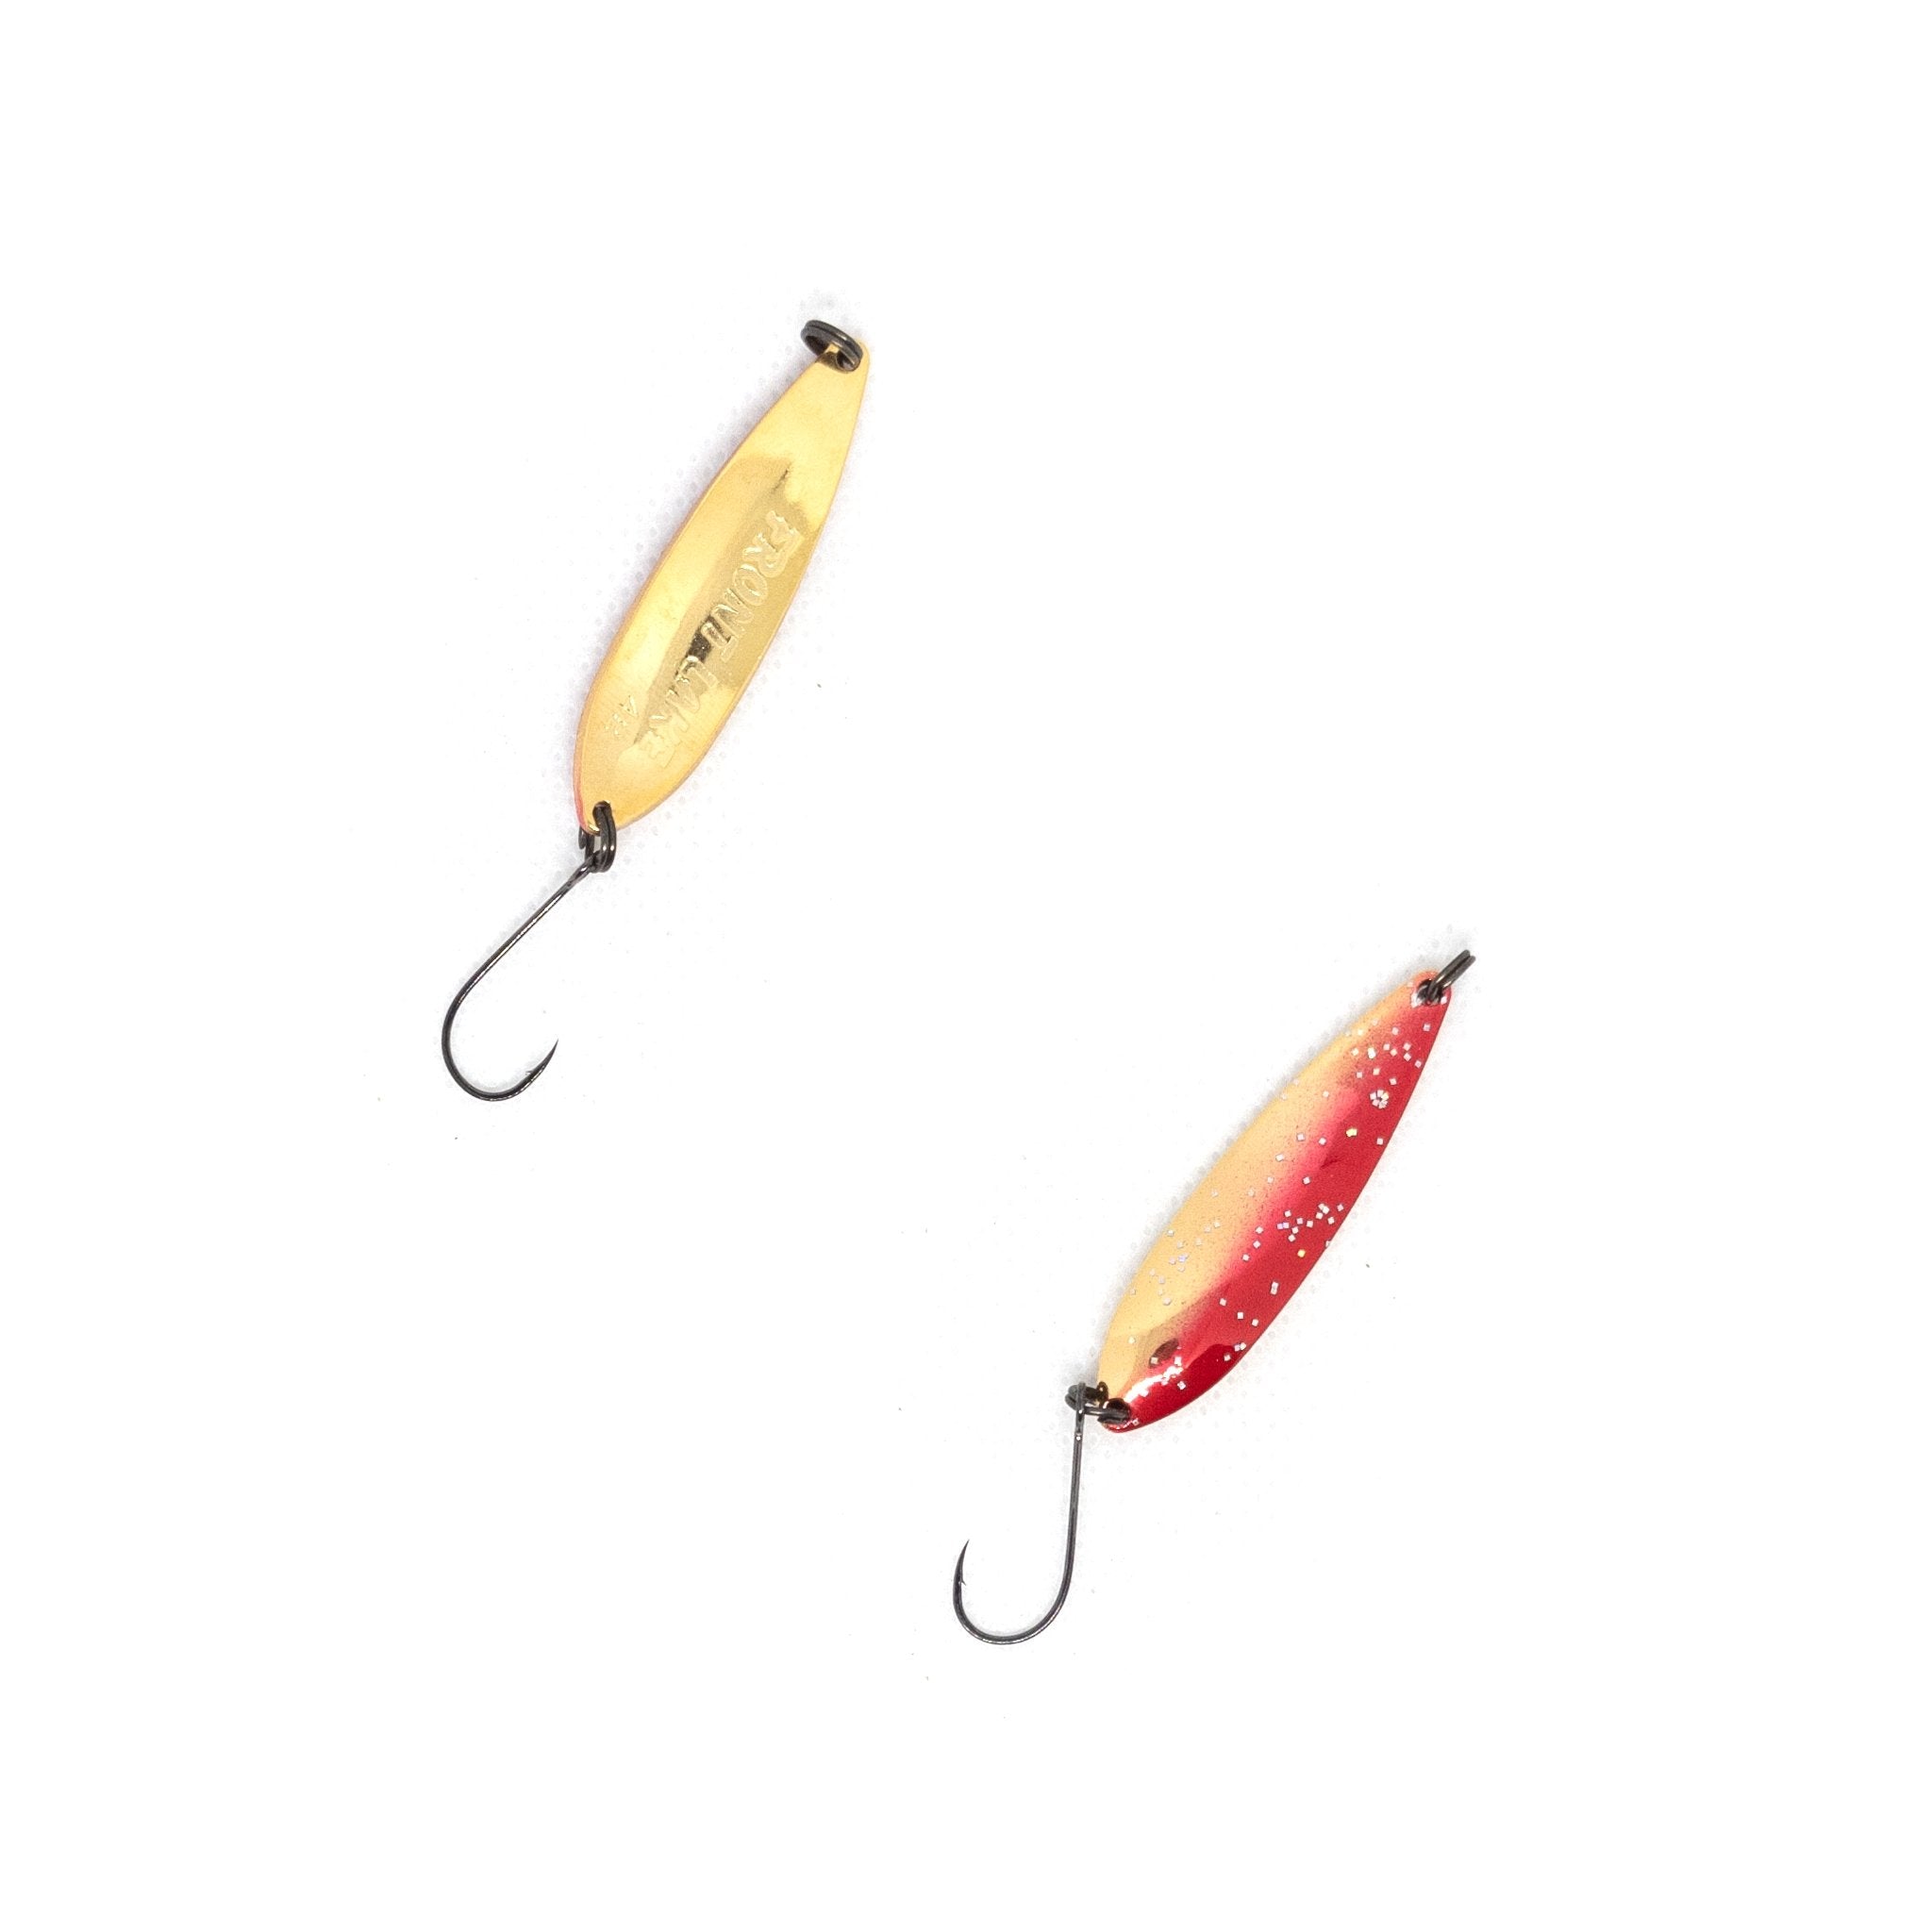 Forest MIU 1.4g Trout Spoon 22 Limited TS Color #01 – The Borrowed Lure